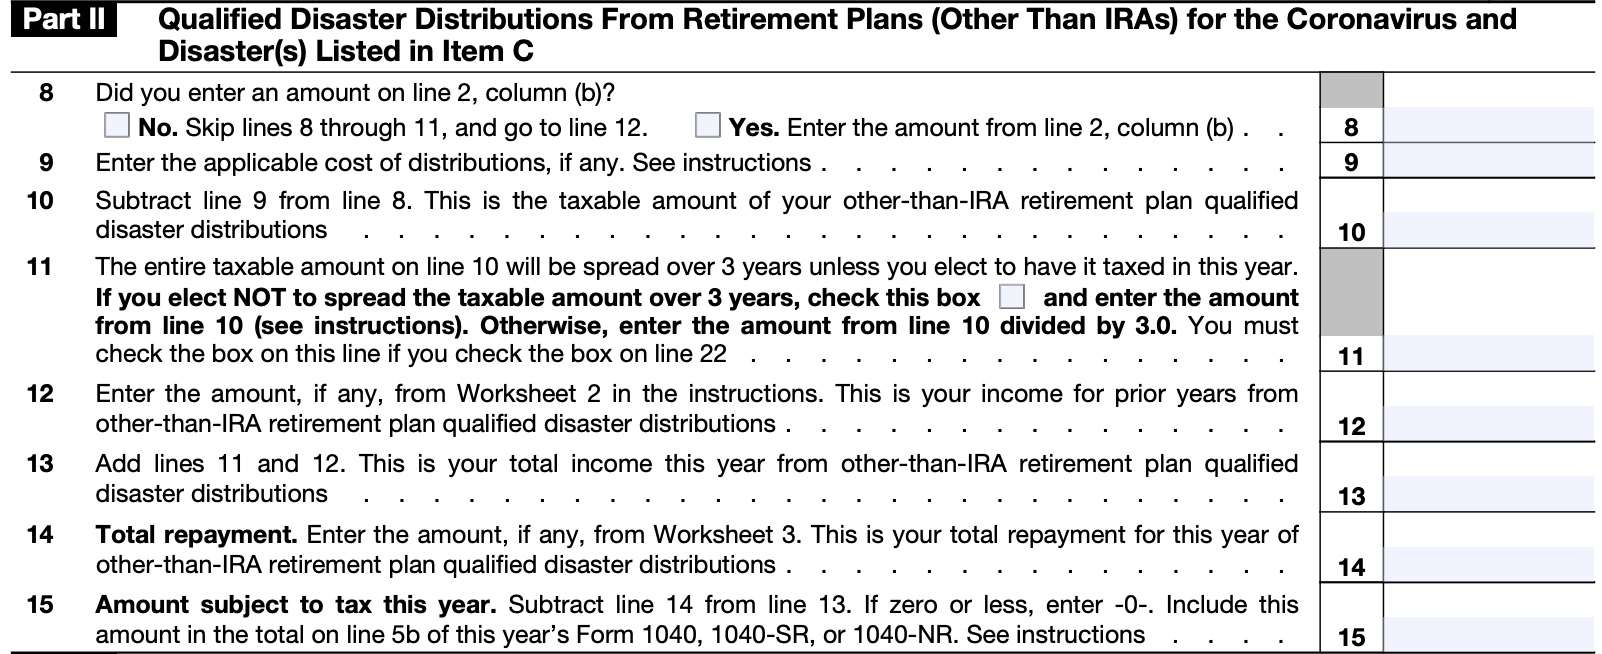 irs form 8915-f, part II: qualified disaster distributions from retirement plans for coronavirus and disasters listed in item c